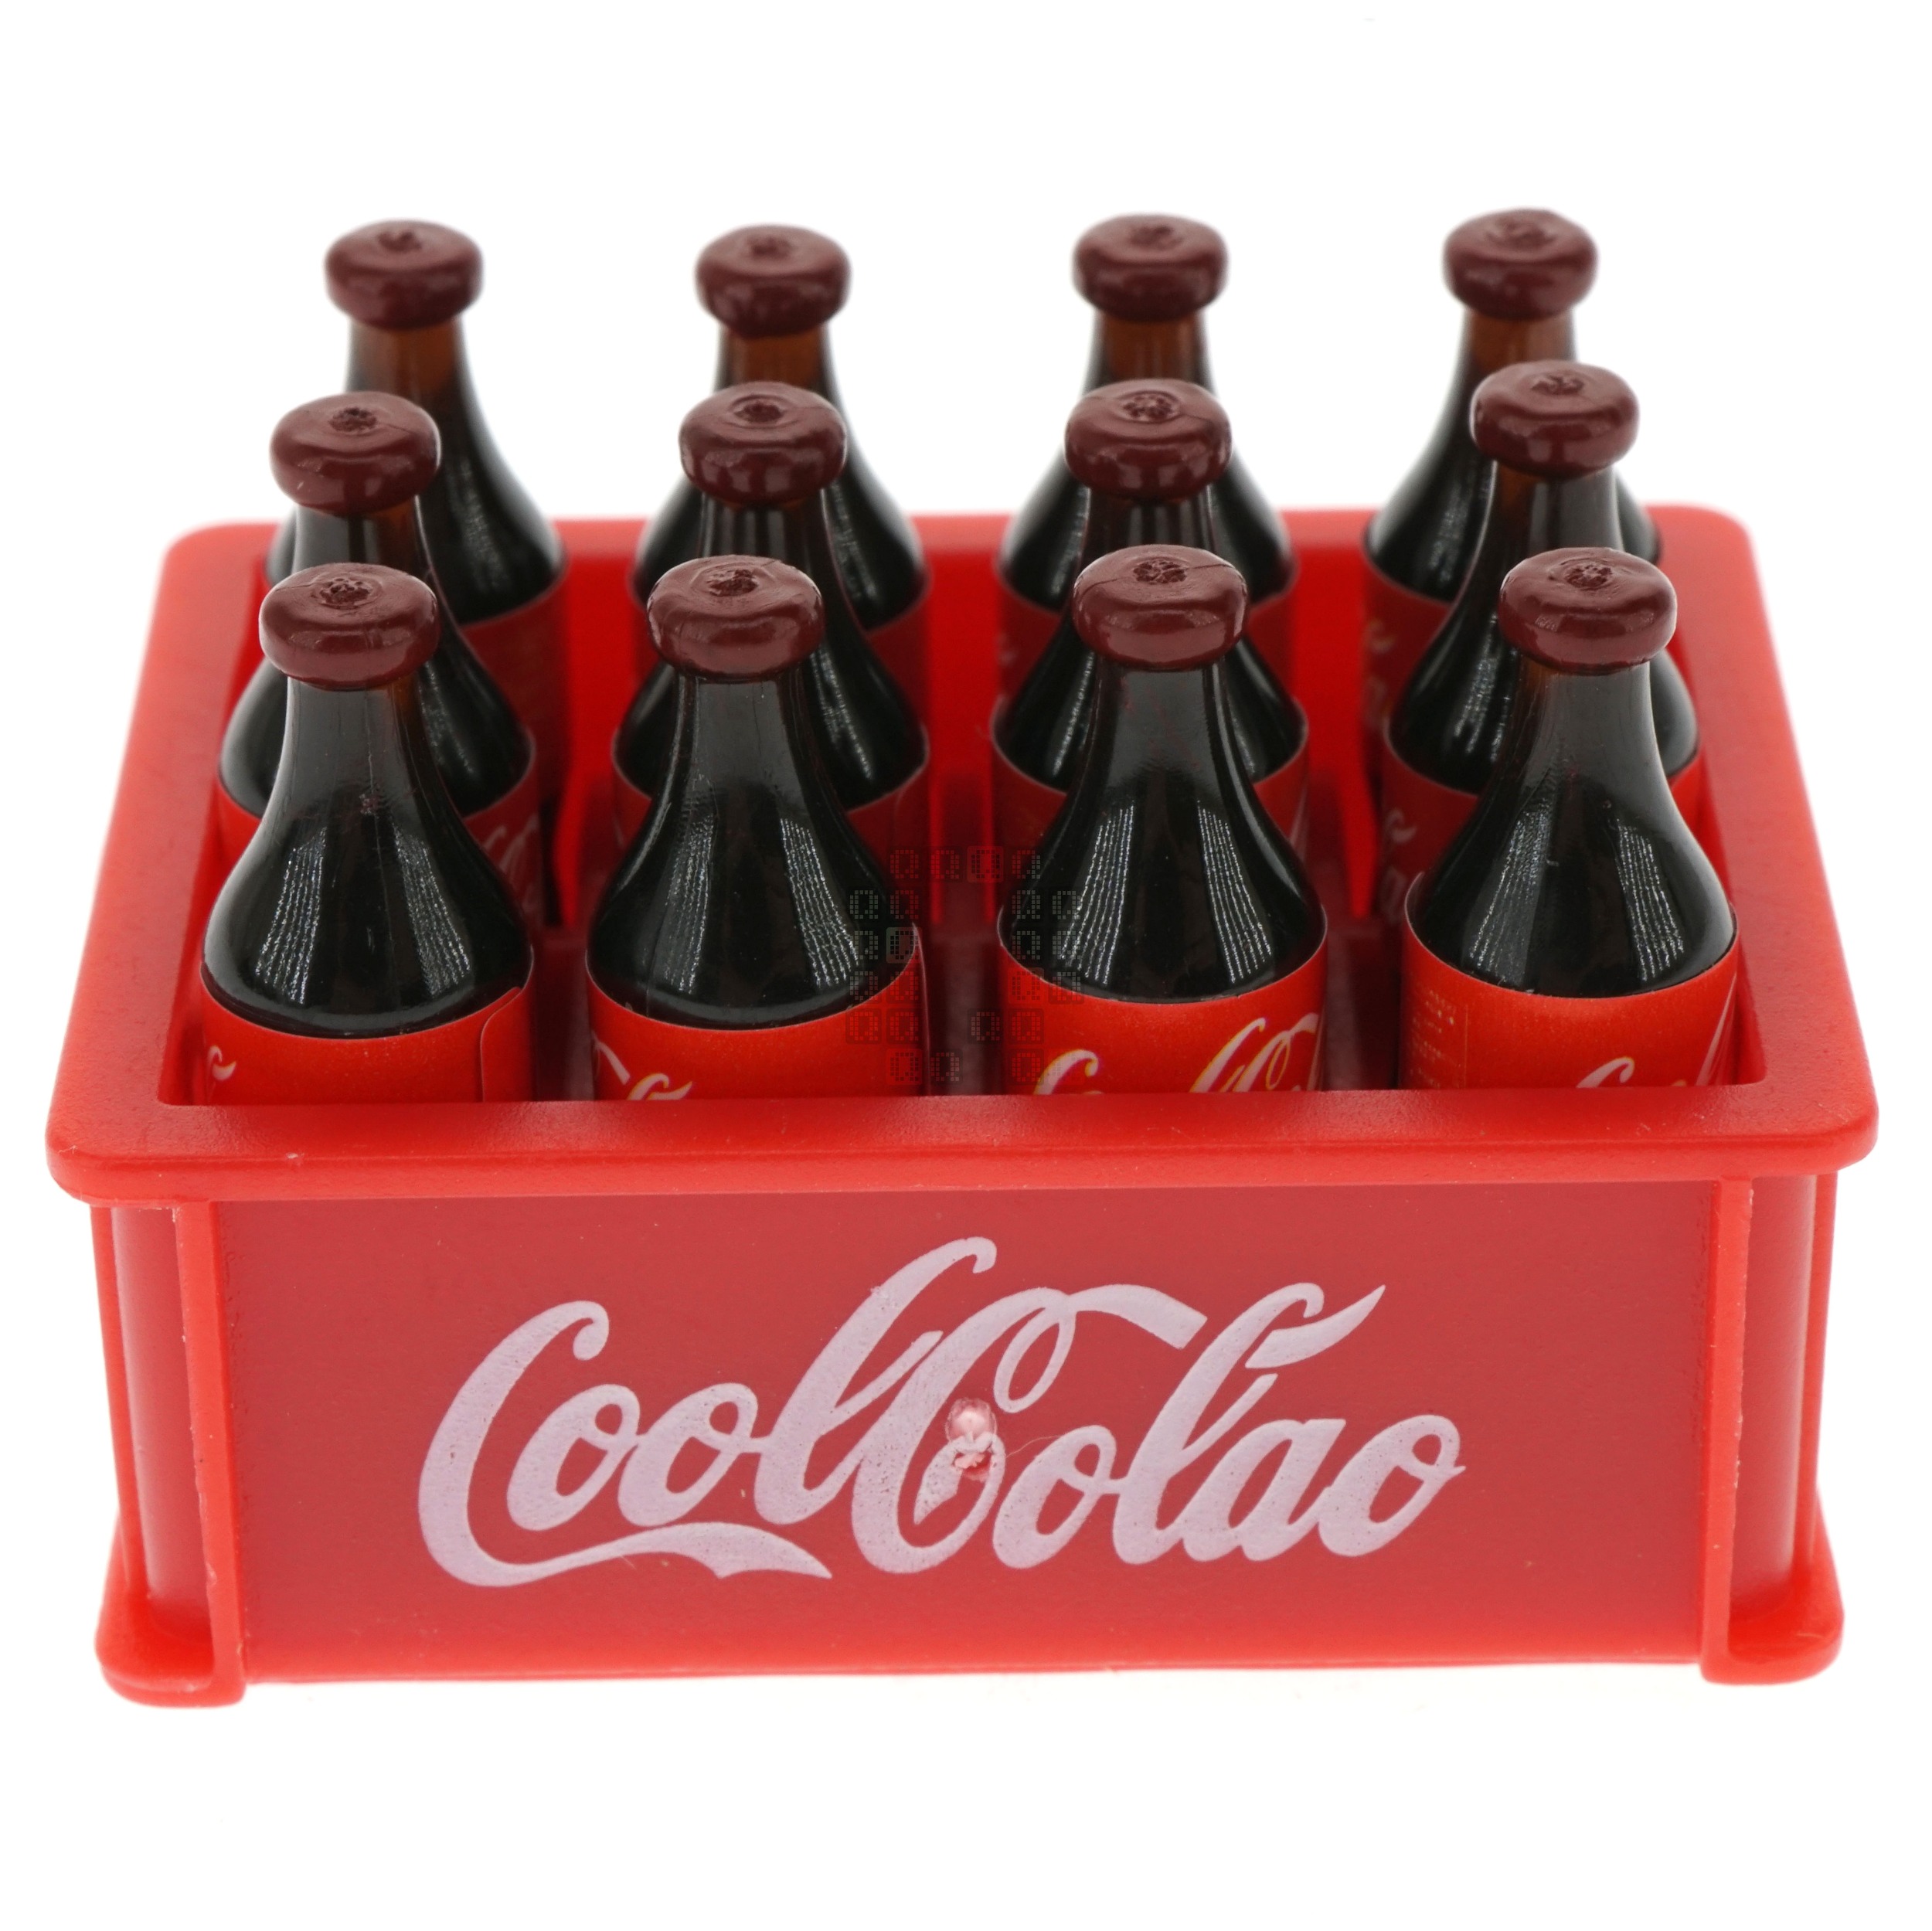 1:12 Scale, 12 Miniature Cool-Colao 'Glass' Bottles in Plastic Carrying Case